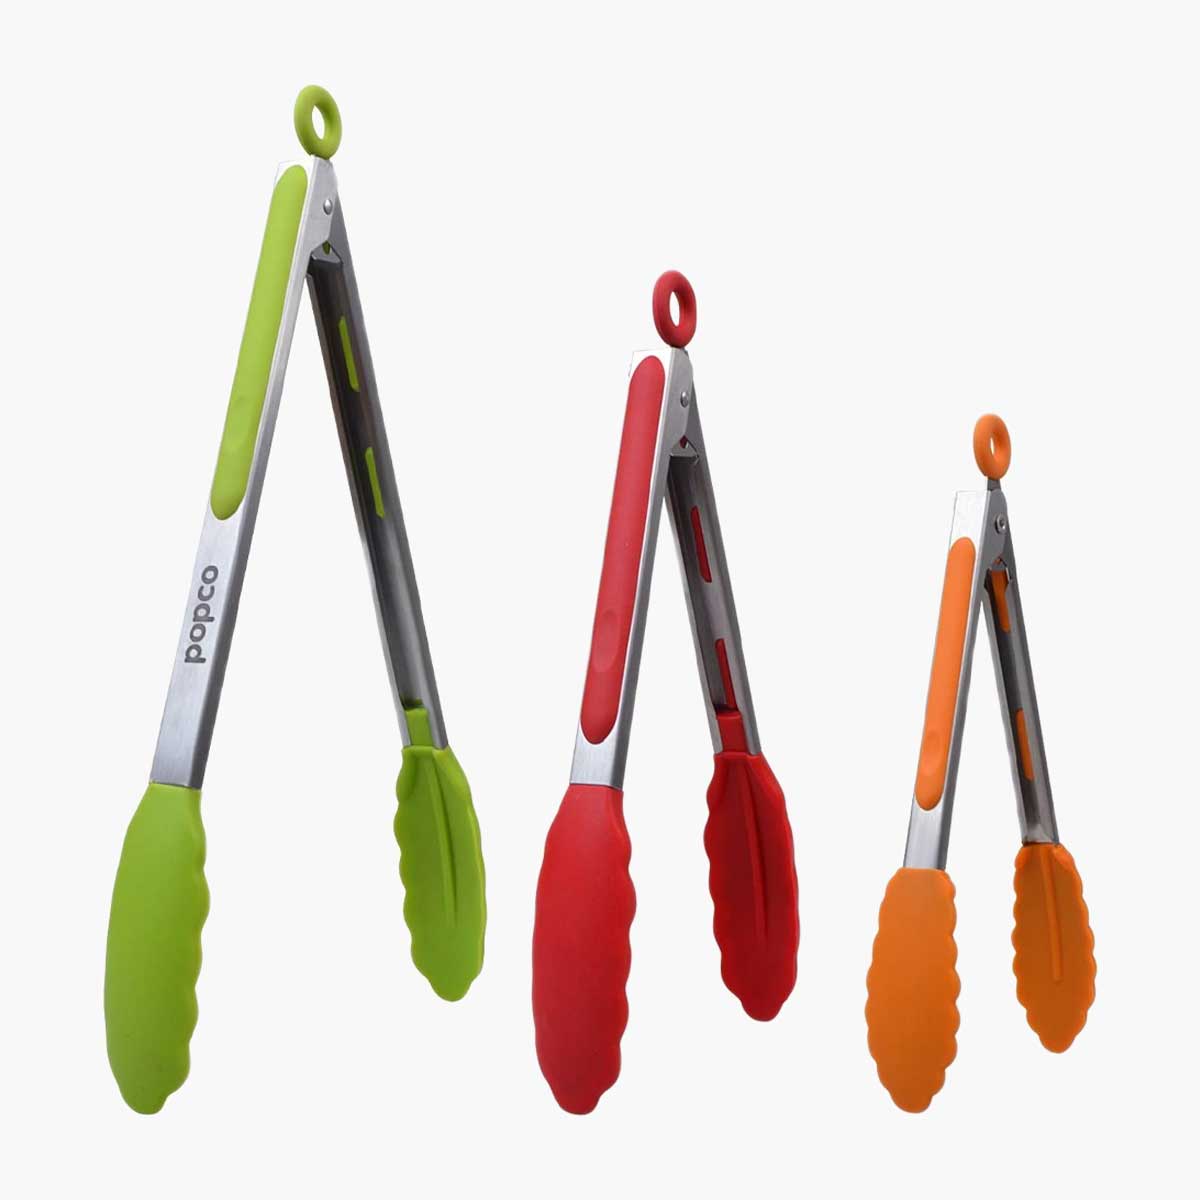 Popco Silicone Tipped Tongs green red and orange with white background.